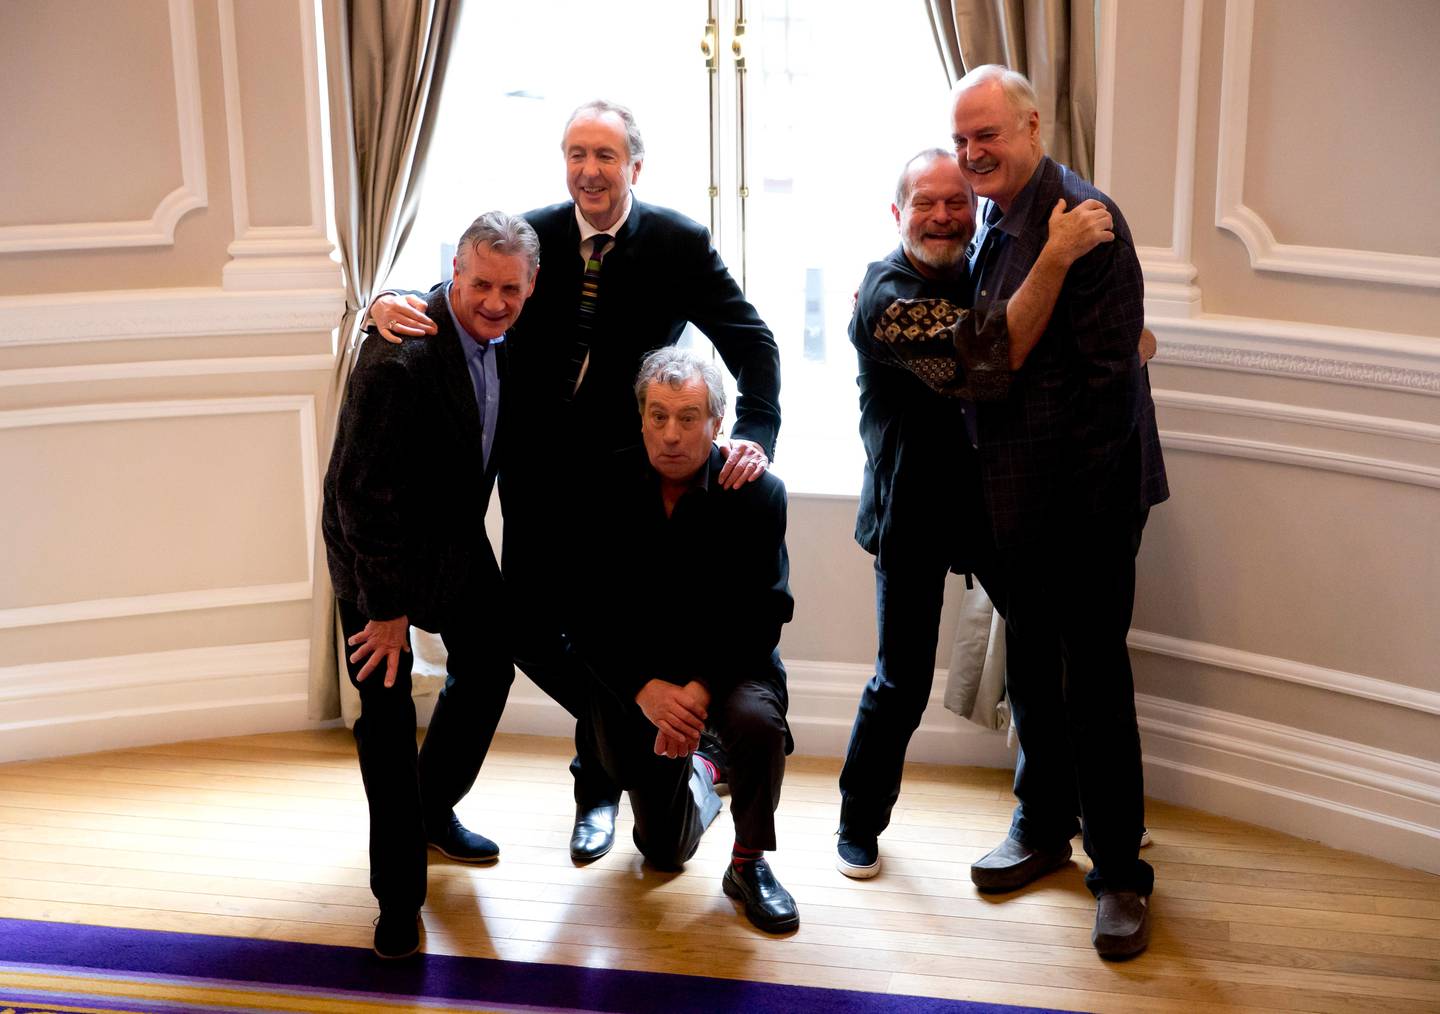 The surviving members of the Monty Python comedy group, from left, Michael Palin, Eric Idle, Terry Jones, Terry Gilliam and John Cleese pose for photographers during a photocall to promote a reunion stage show they are going to perform together, at a hotel in London, Thursday, Nov. 21, 2013.  The group had its first big success with the Monty Python's Flying Circus TV show, which ran from 1969 until 1974, winning fans around the world with its bizarre sketches.   (AP Photo/Matt Dunham)